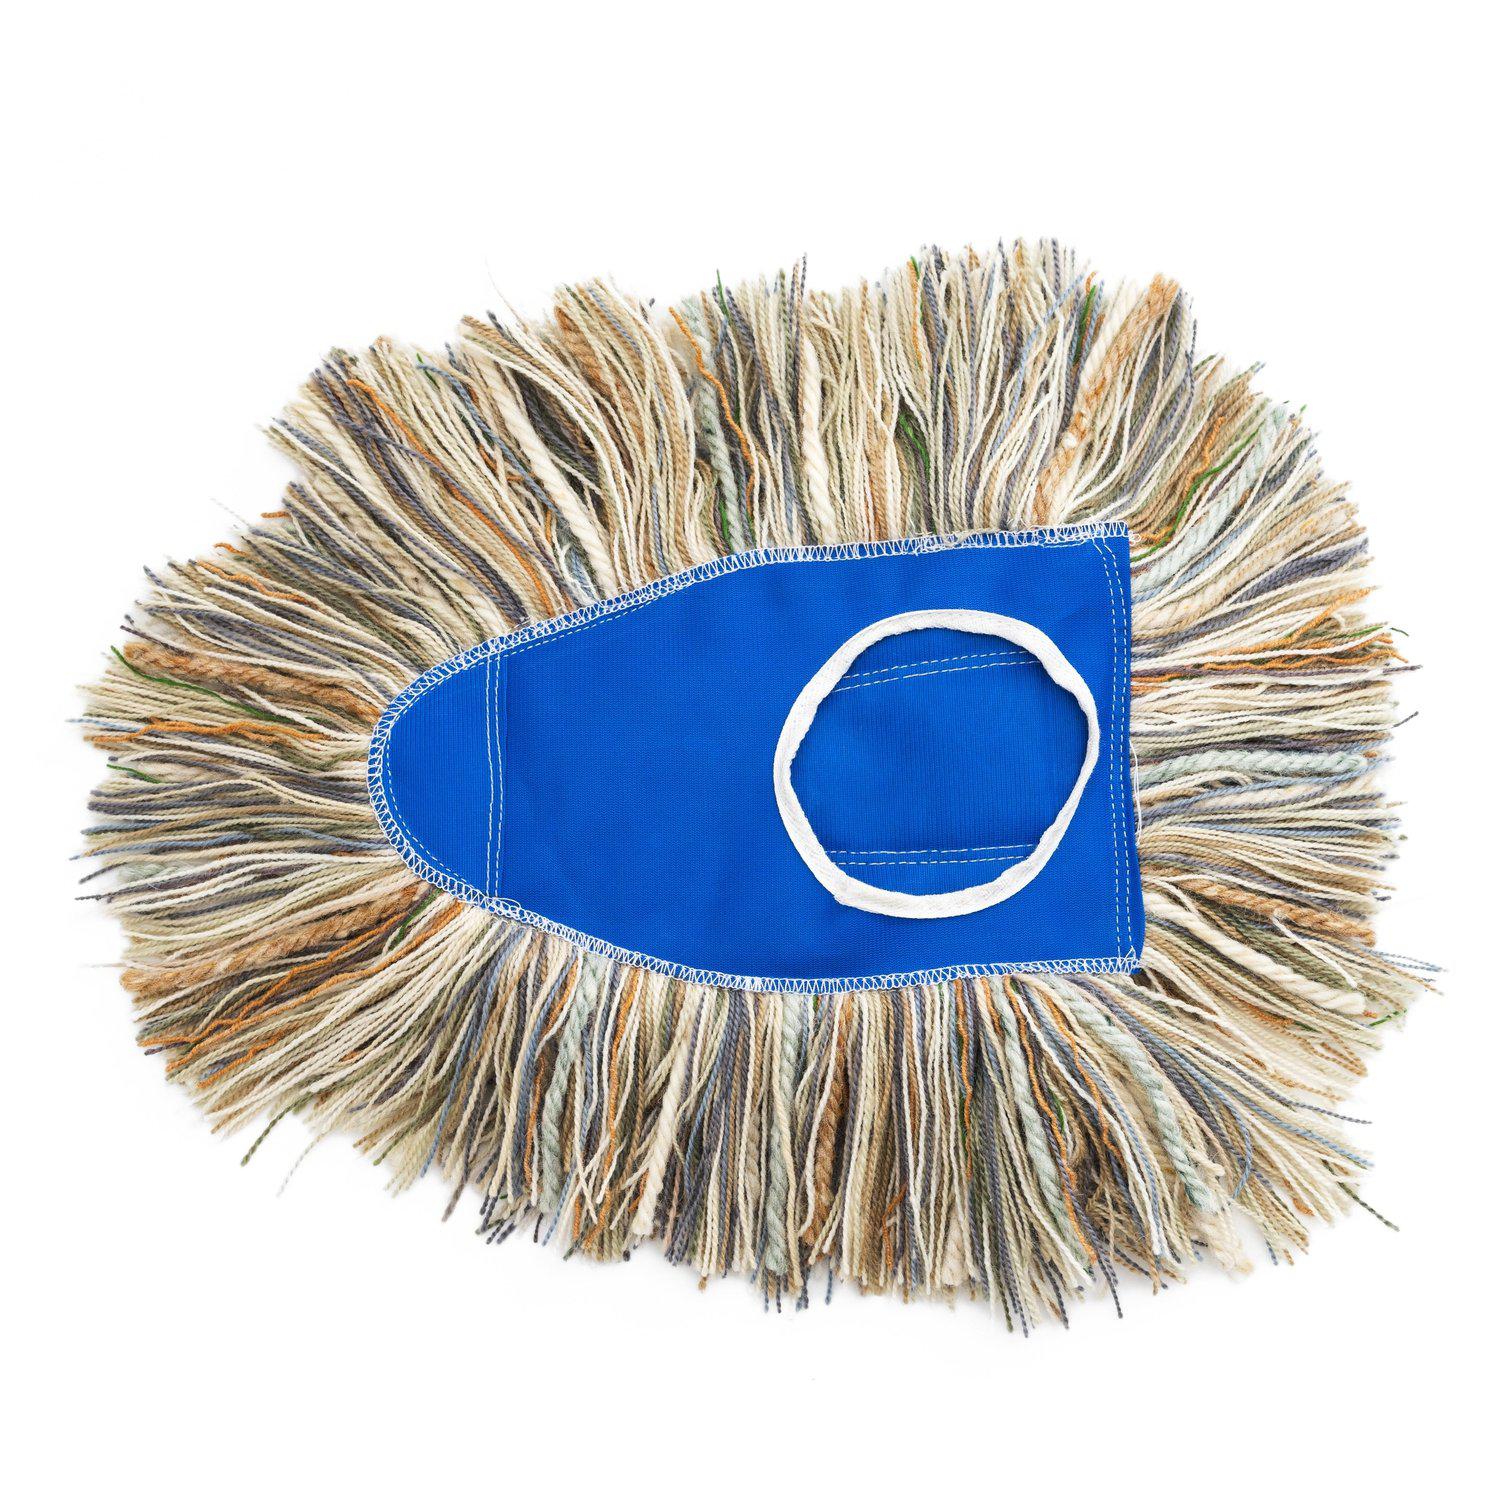 Wooly Dry Mop Replacement Head-Mops-Fuller Brush Company